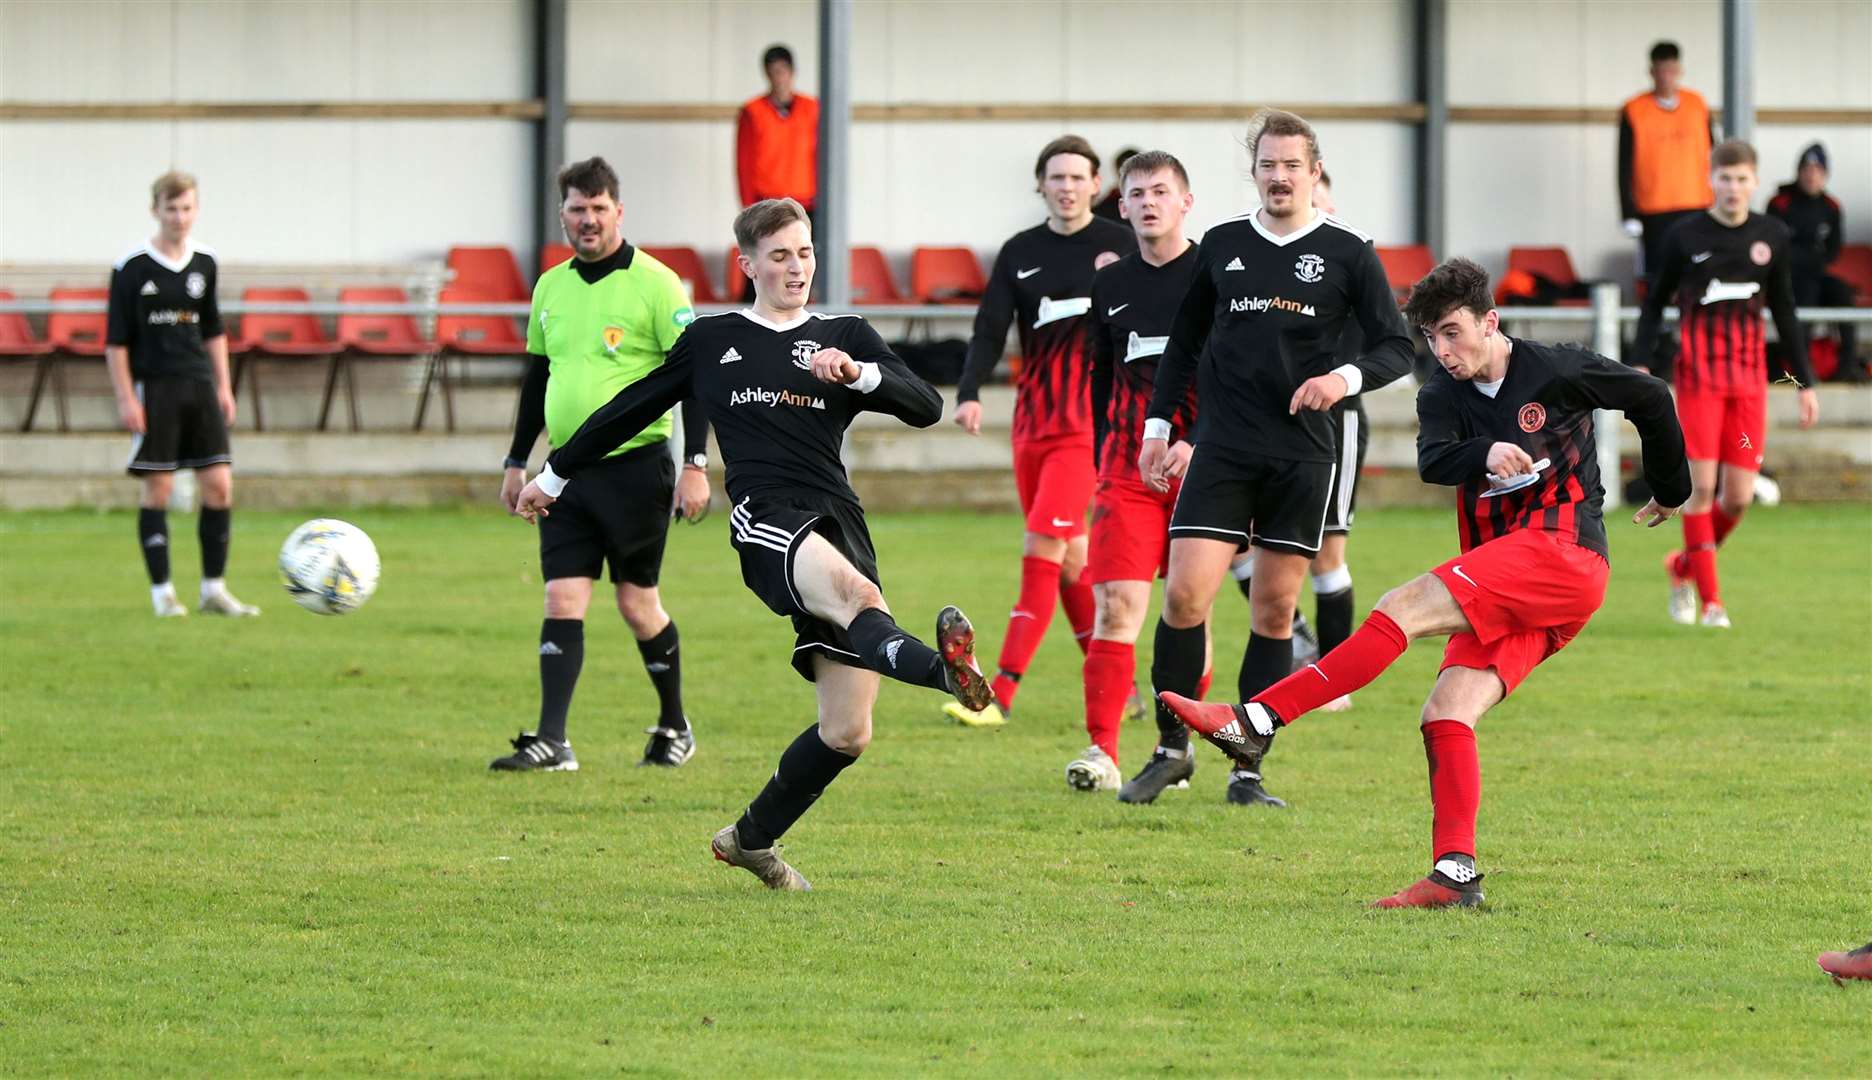 Halkirk United striker Kyle Henderson fires a shot past an outstretched Aarron Wilson in the Anglers' 4-0 win against Thurso last Saturday. Picture: James Gunn